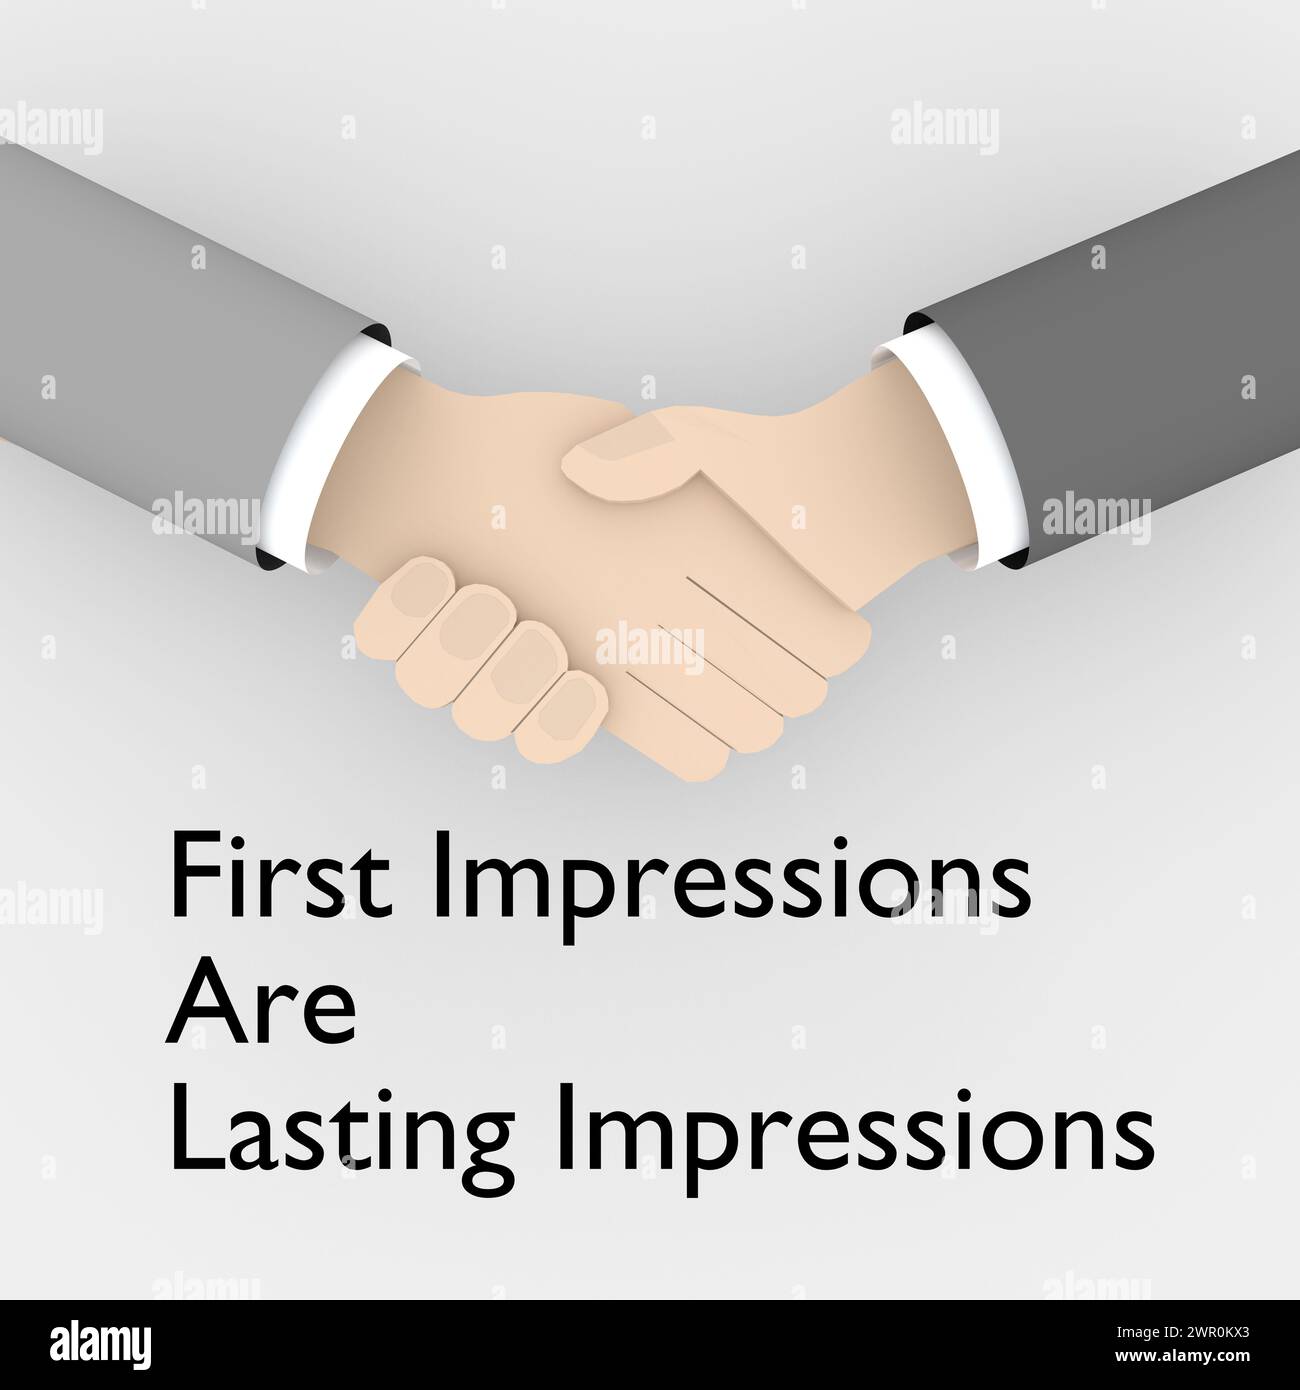 3D illustration of handshake titled as First Impressions Are Lasting Impressions, isolated pale gray. Stock Photo